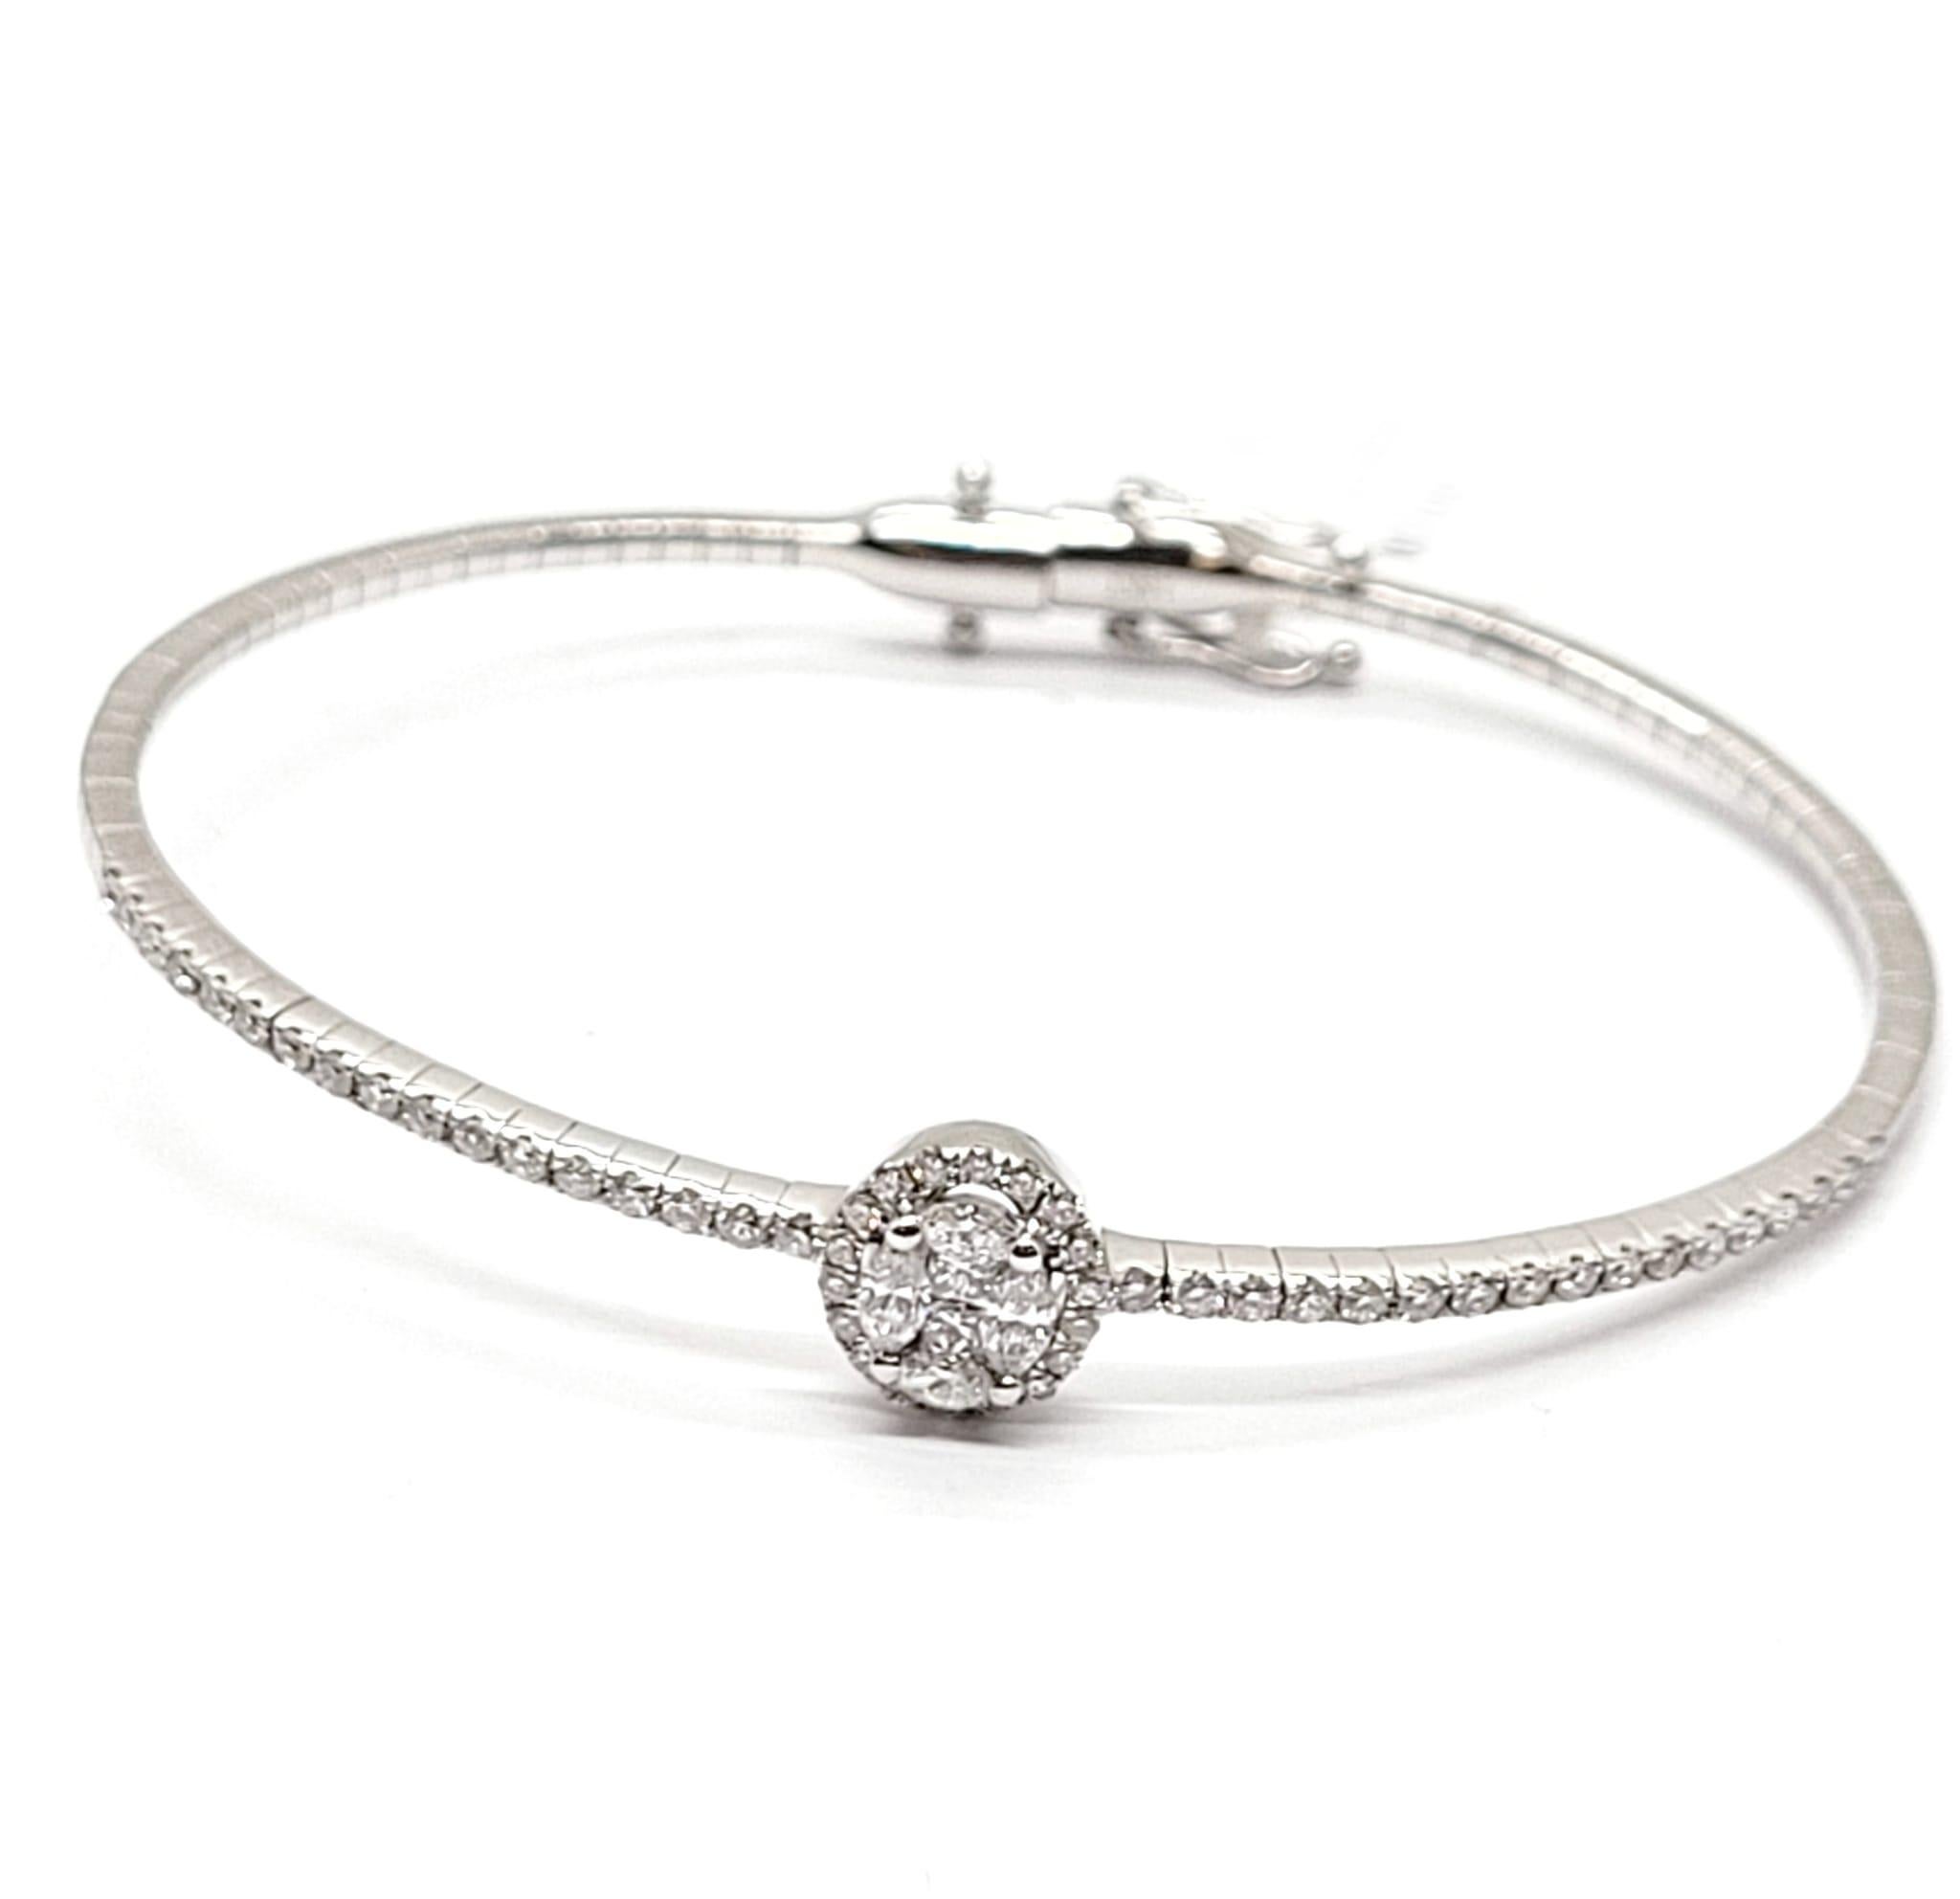 Andreoli Round Shaped Invisible Diamond 18 Karat Gold Bangle Bracelet

This bracelet features:
- 0.85 Carat Diamond
- 8.34 g 18kt White Gold
- Made In Italy